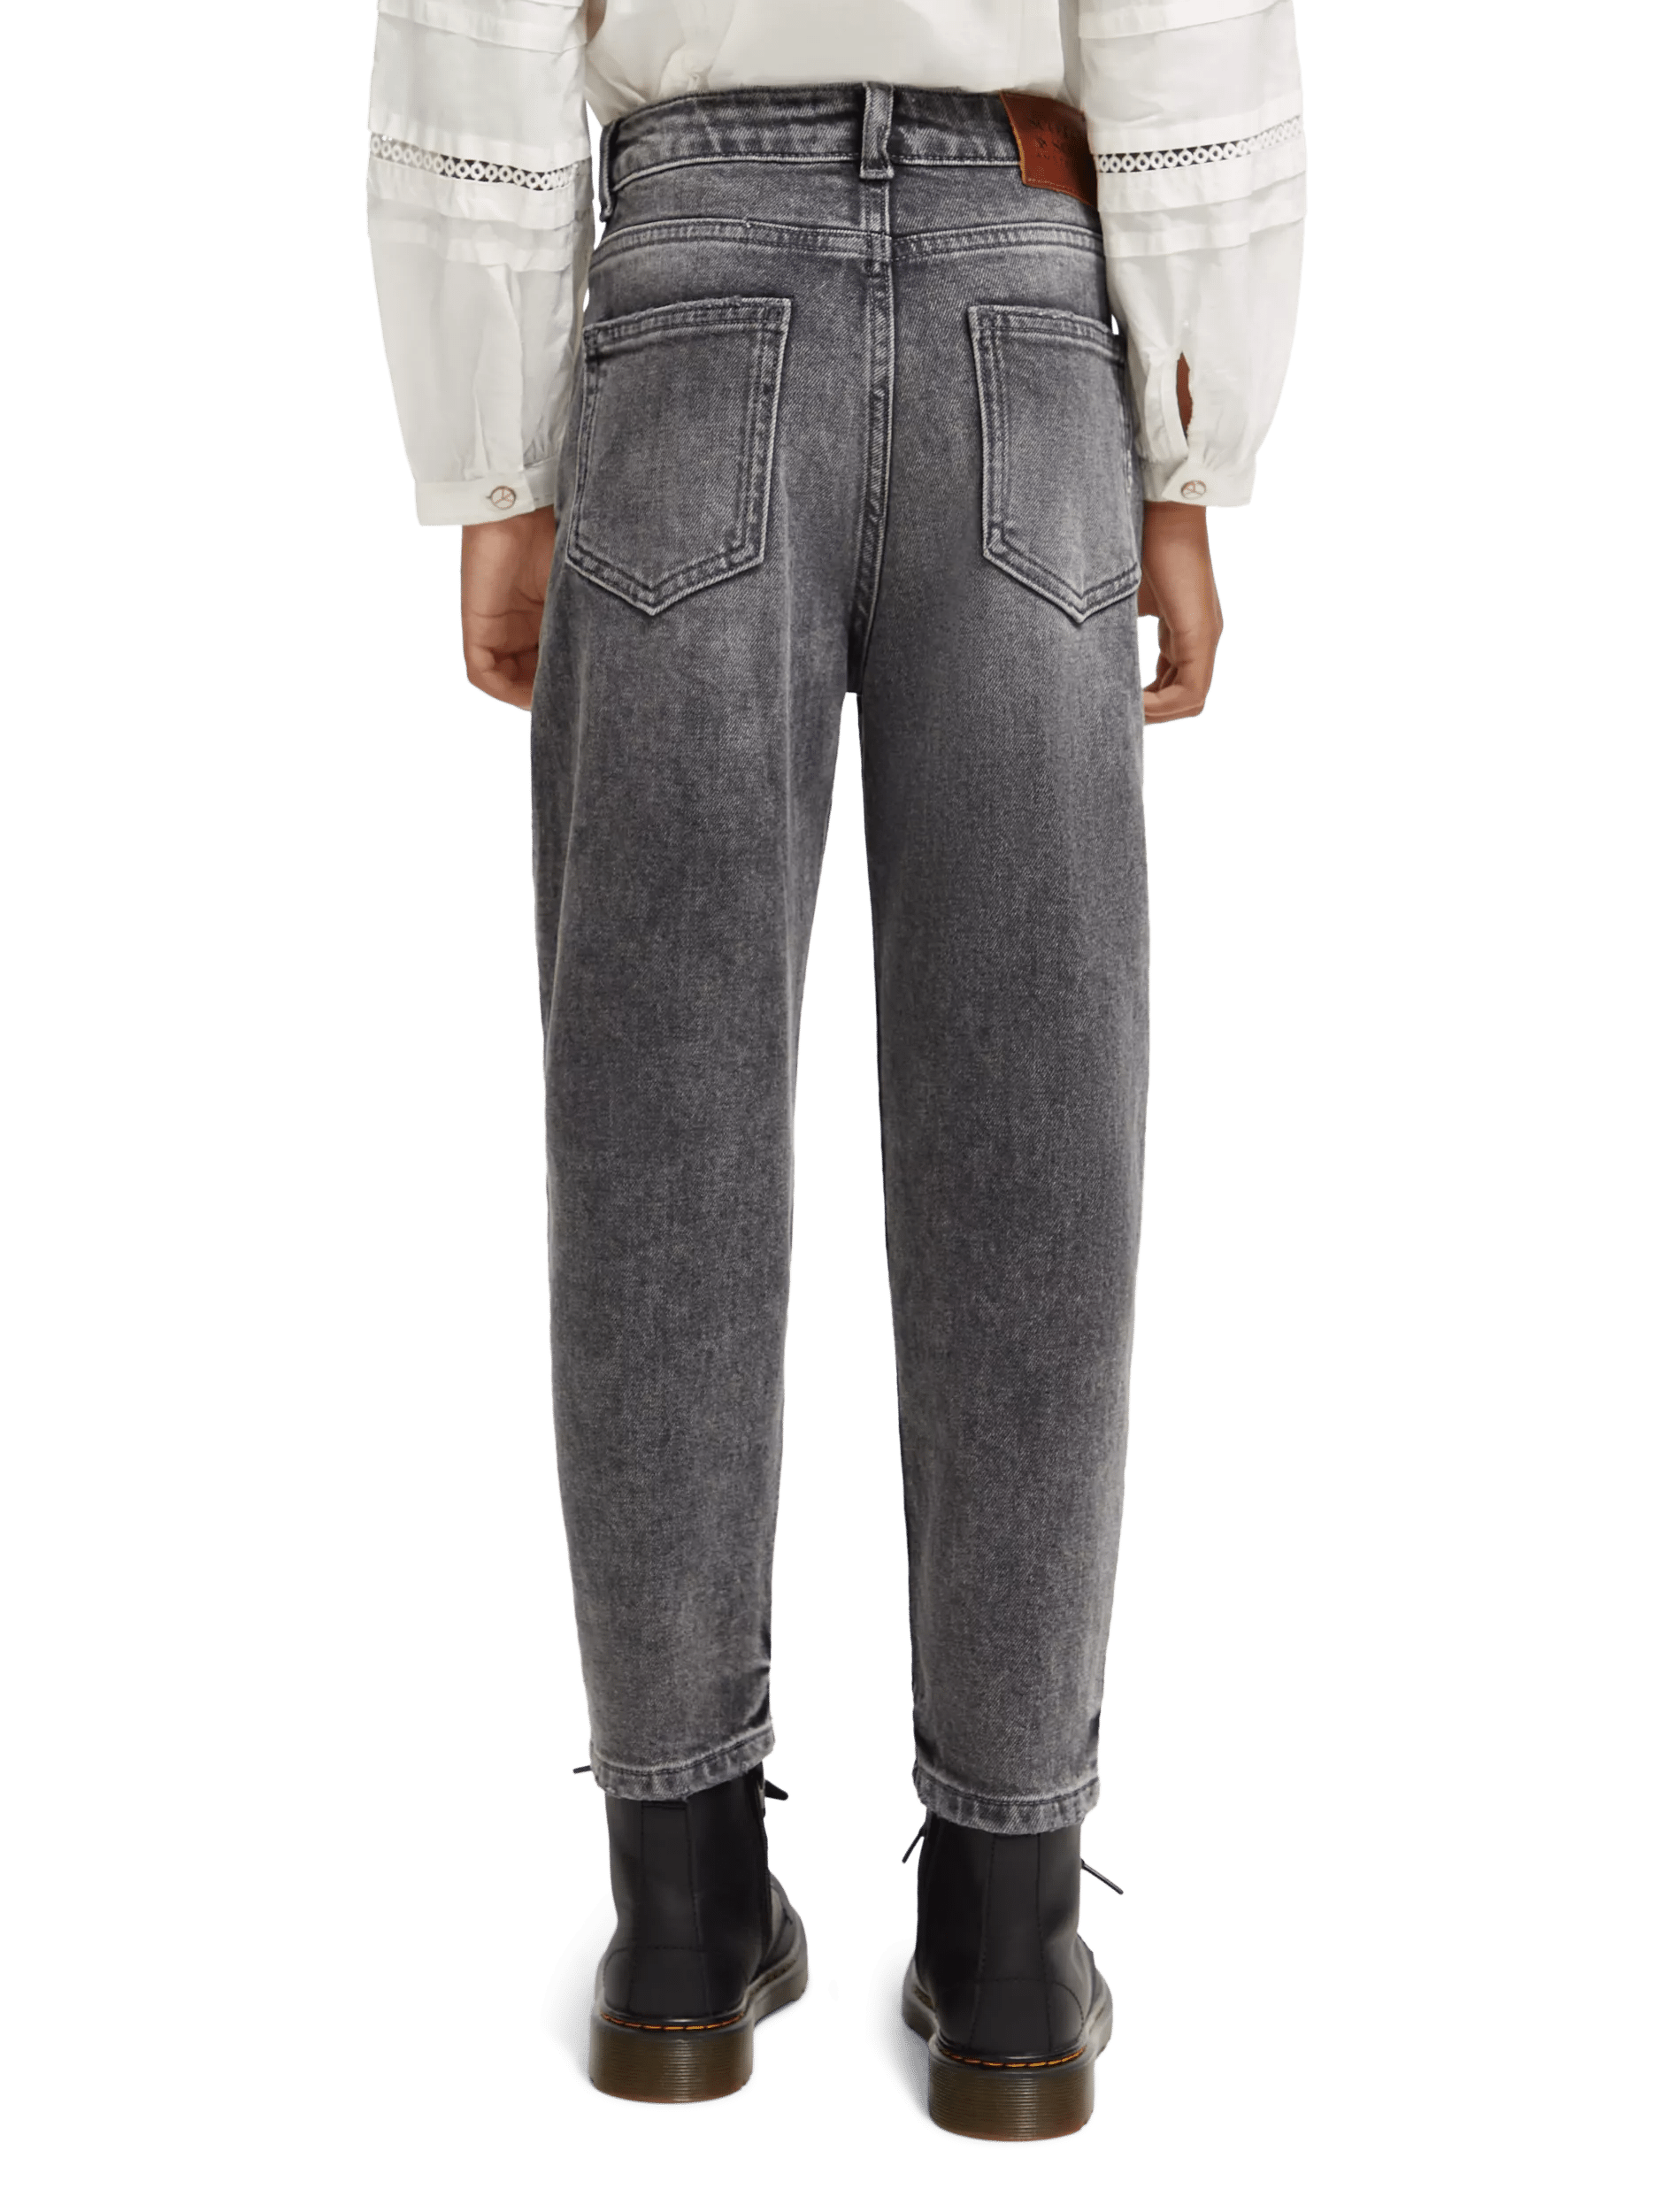 Scotch & Soda The Tide high-rise balloon fit jeans MDL-BCK